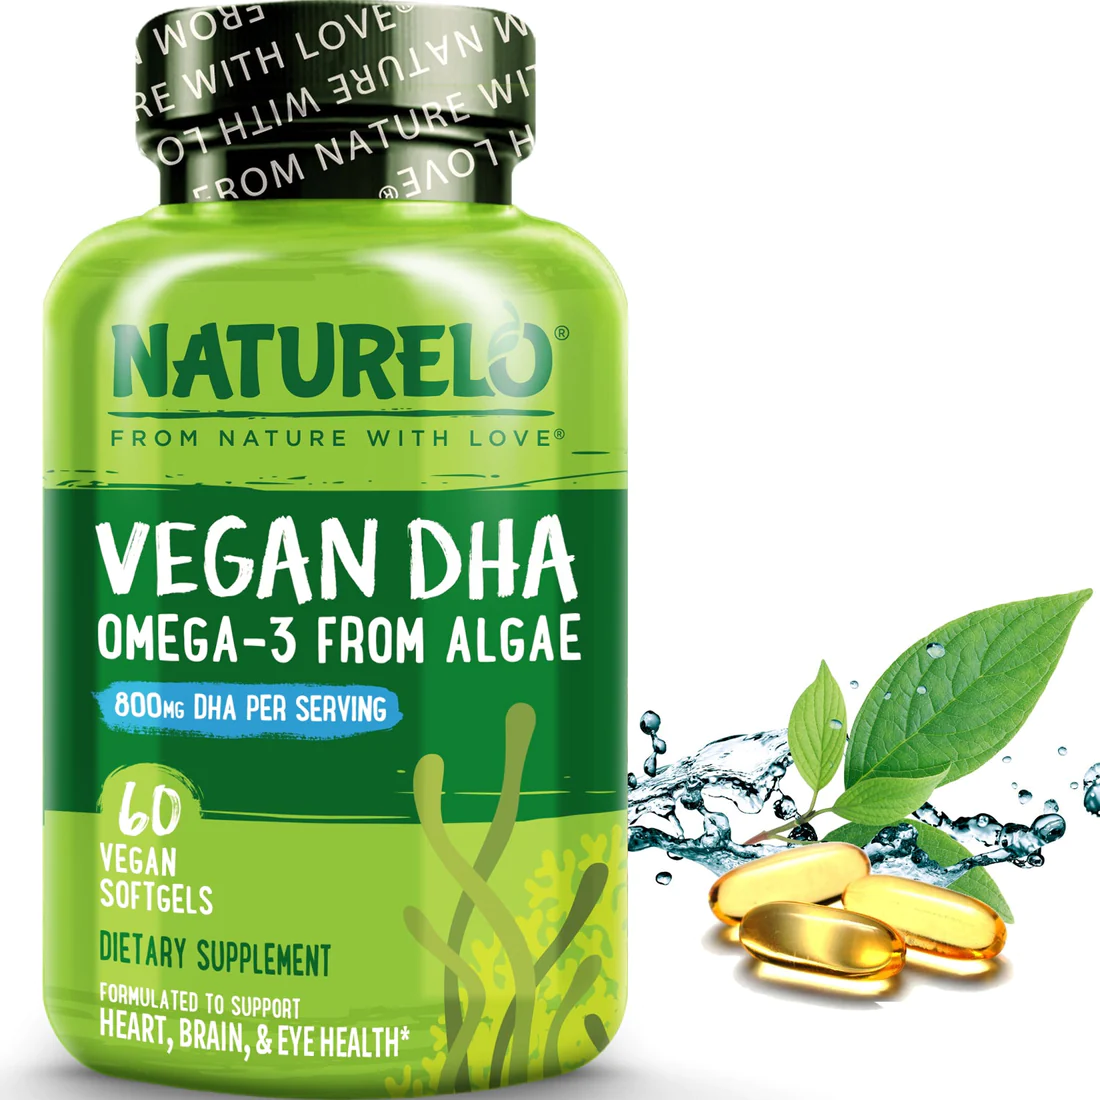 Vegan DHA - Omega 3 Oil from Algae with 800mg Pure DHA